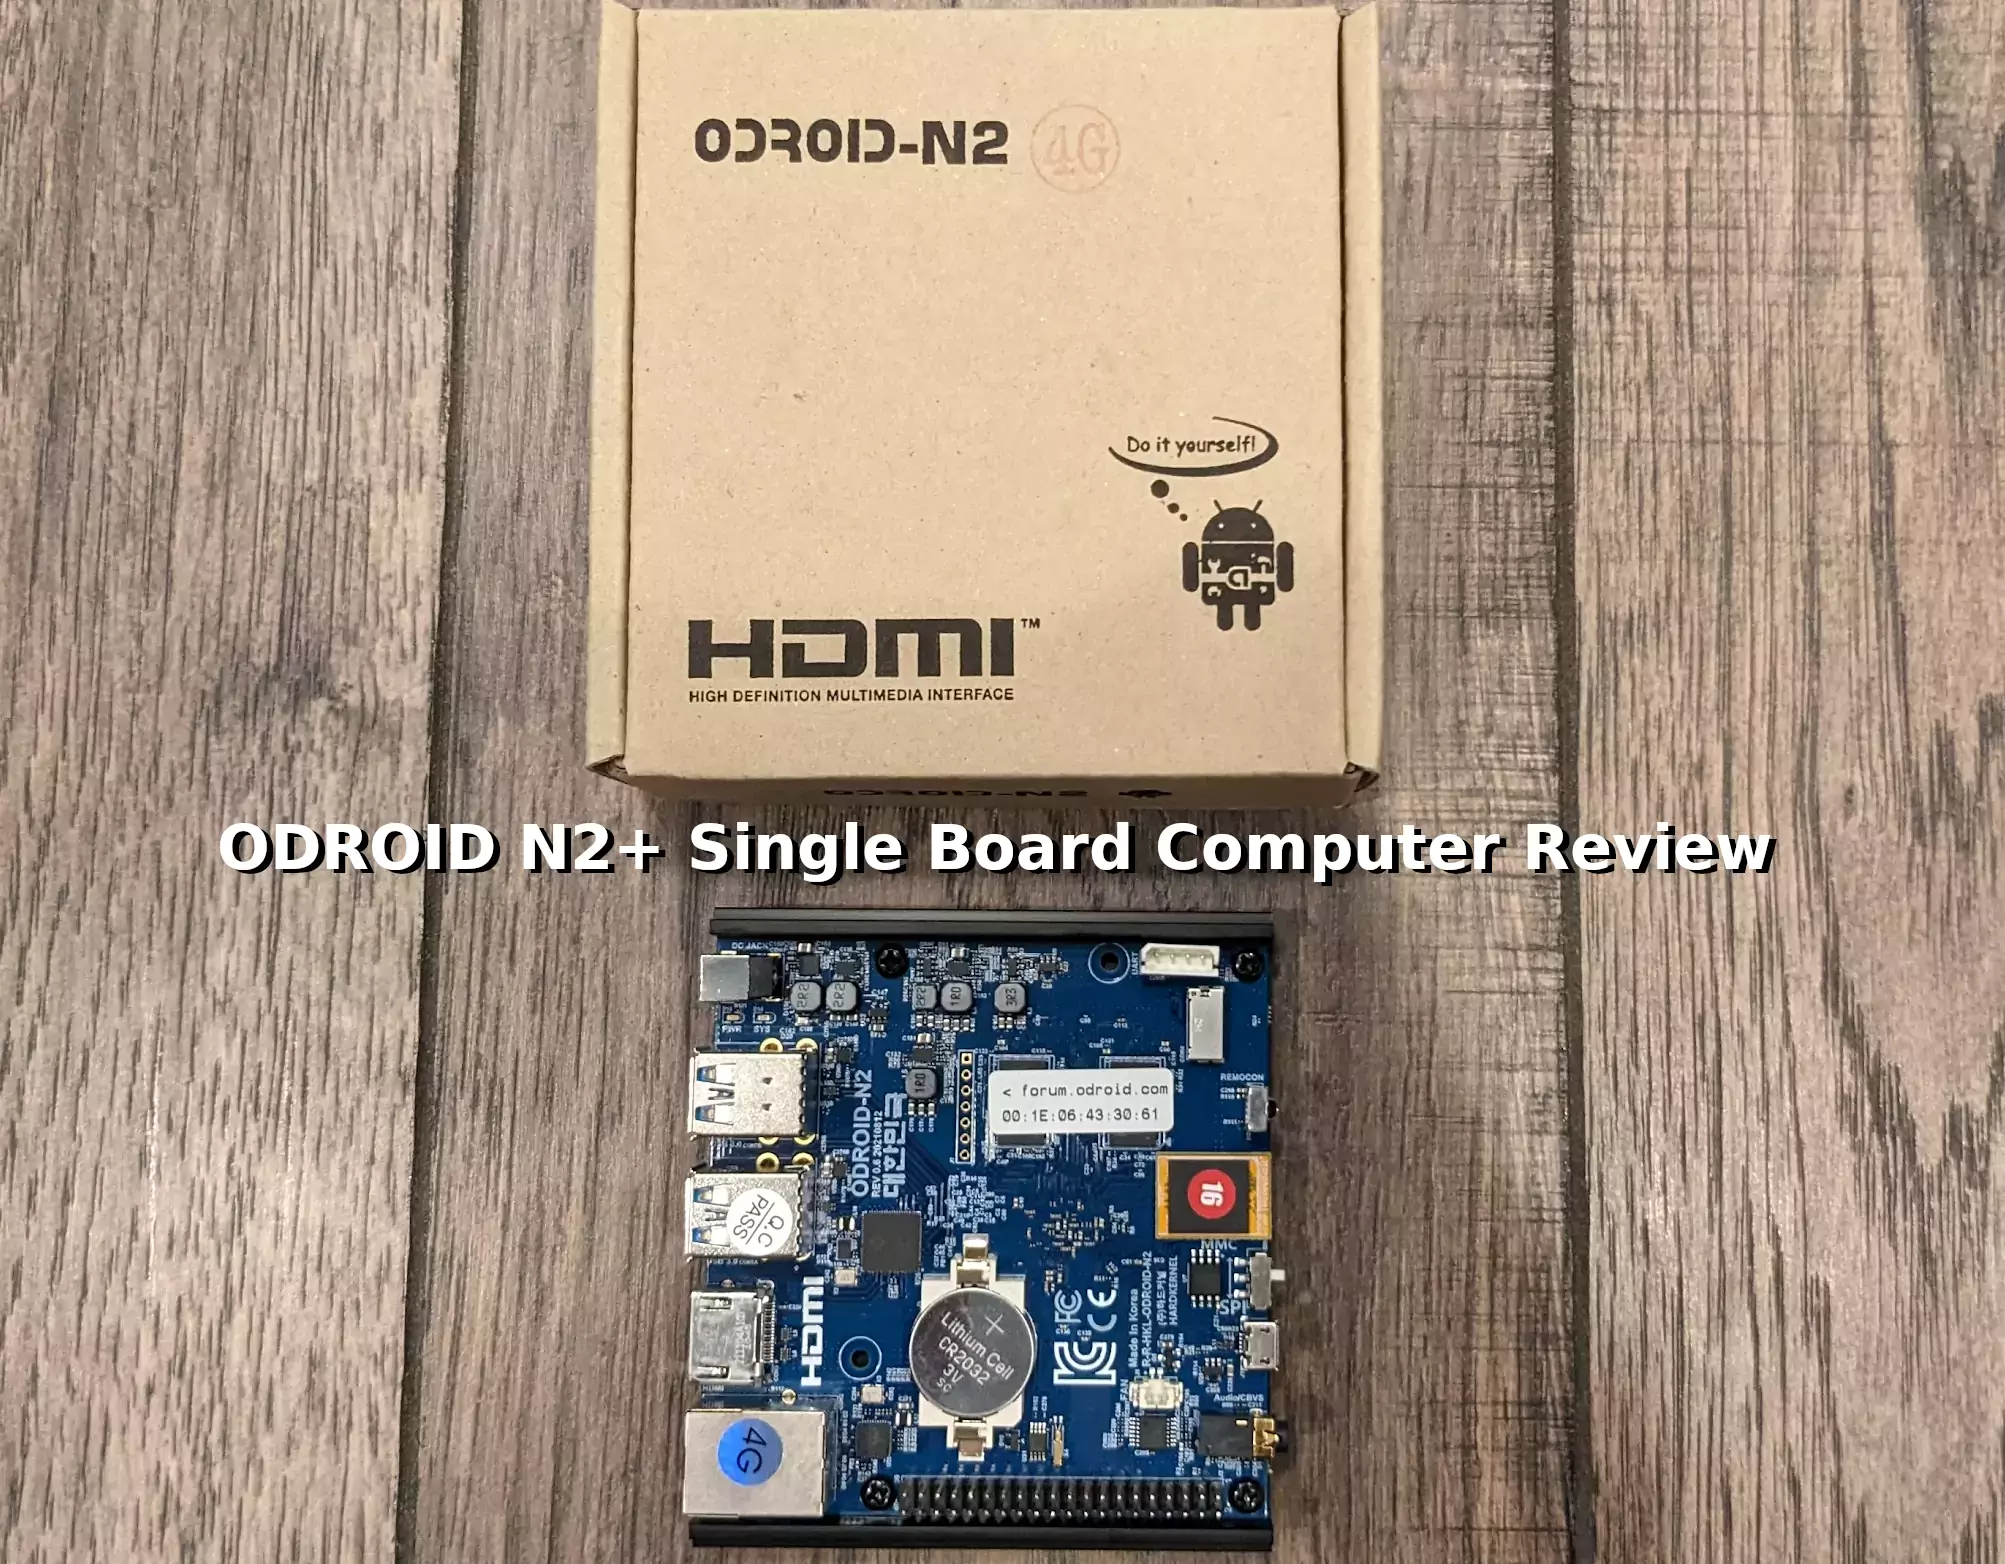 Hardkernel ODROID N2+ SBC Review - James A. Chambers